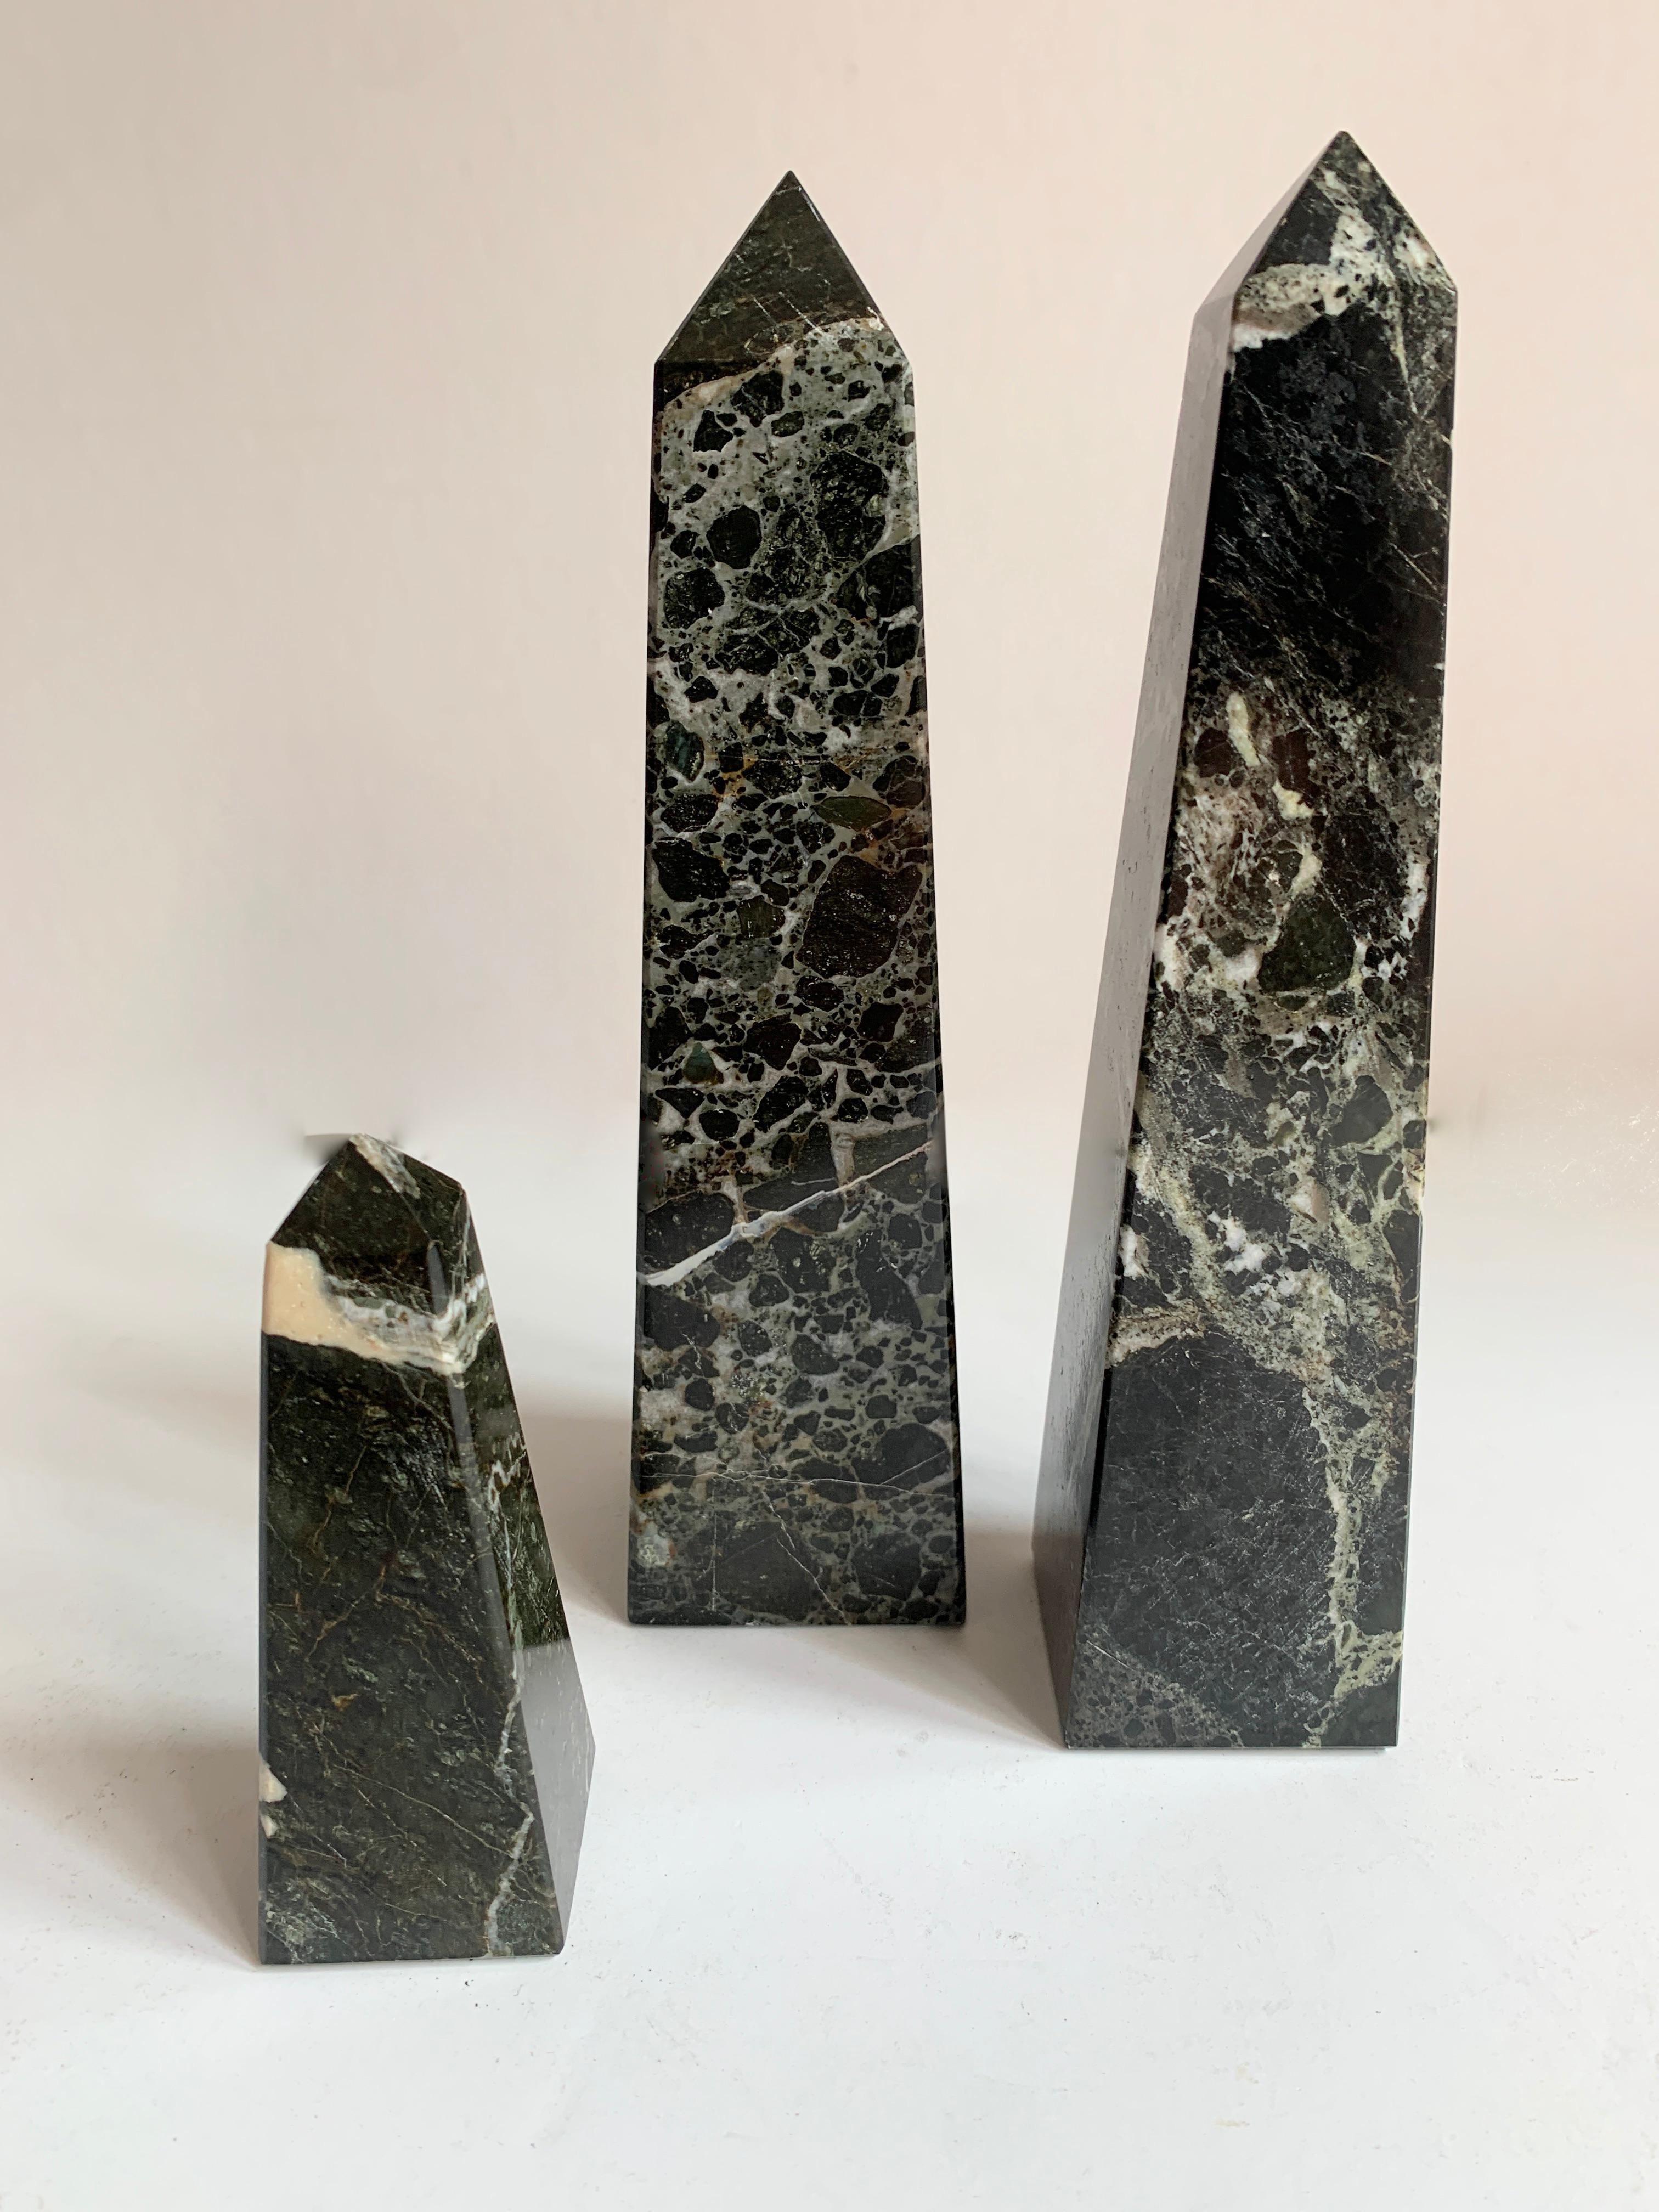 Three black marble obelisks. The trio are a nice decorative addition to the desk or shelf, however could easily be paper weights or bookends. A very nice set of three black with white veining.

Sizes: 
1.75 x 1.75 x 8